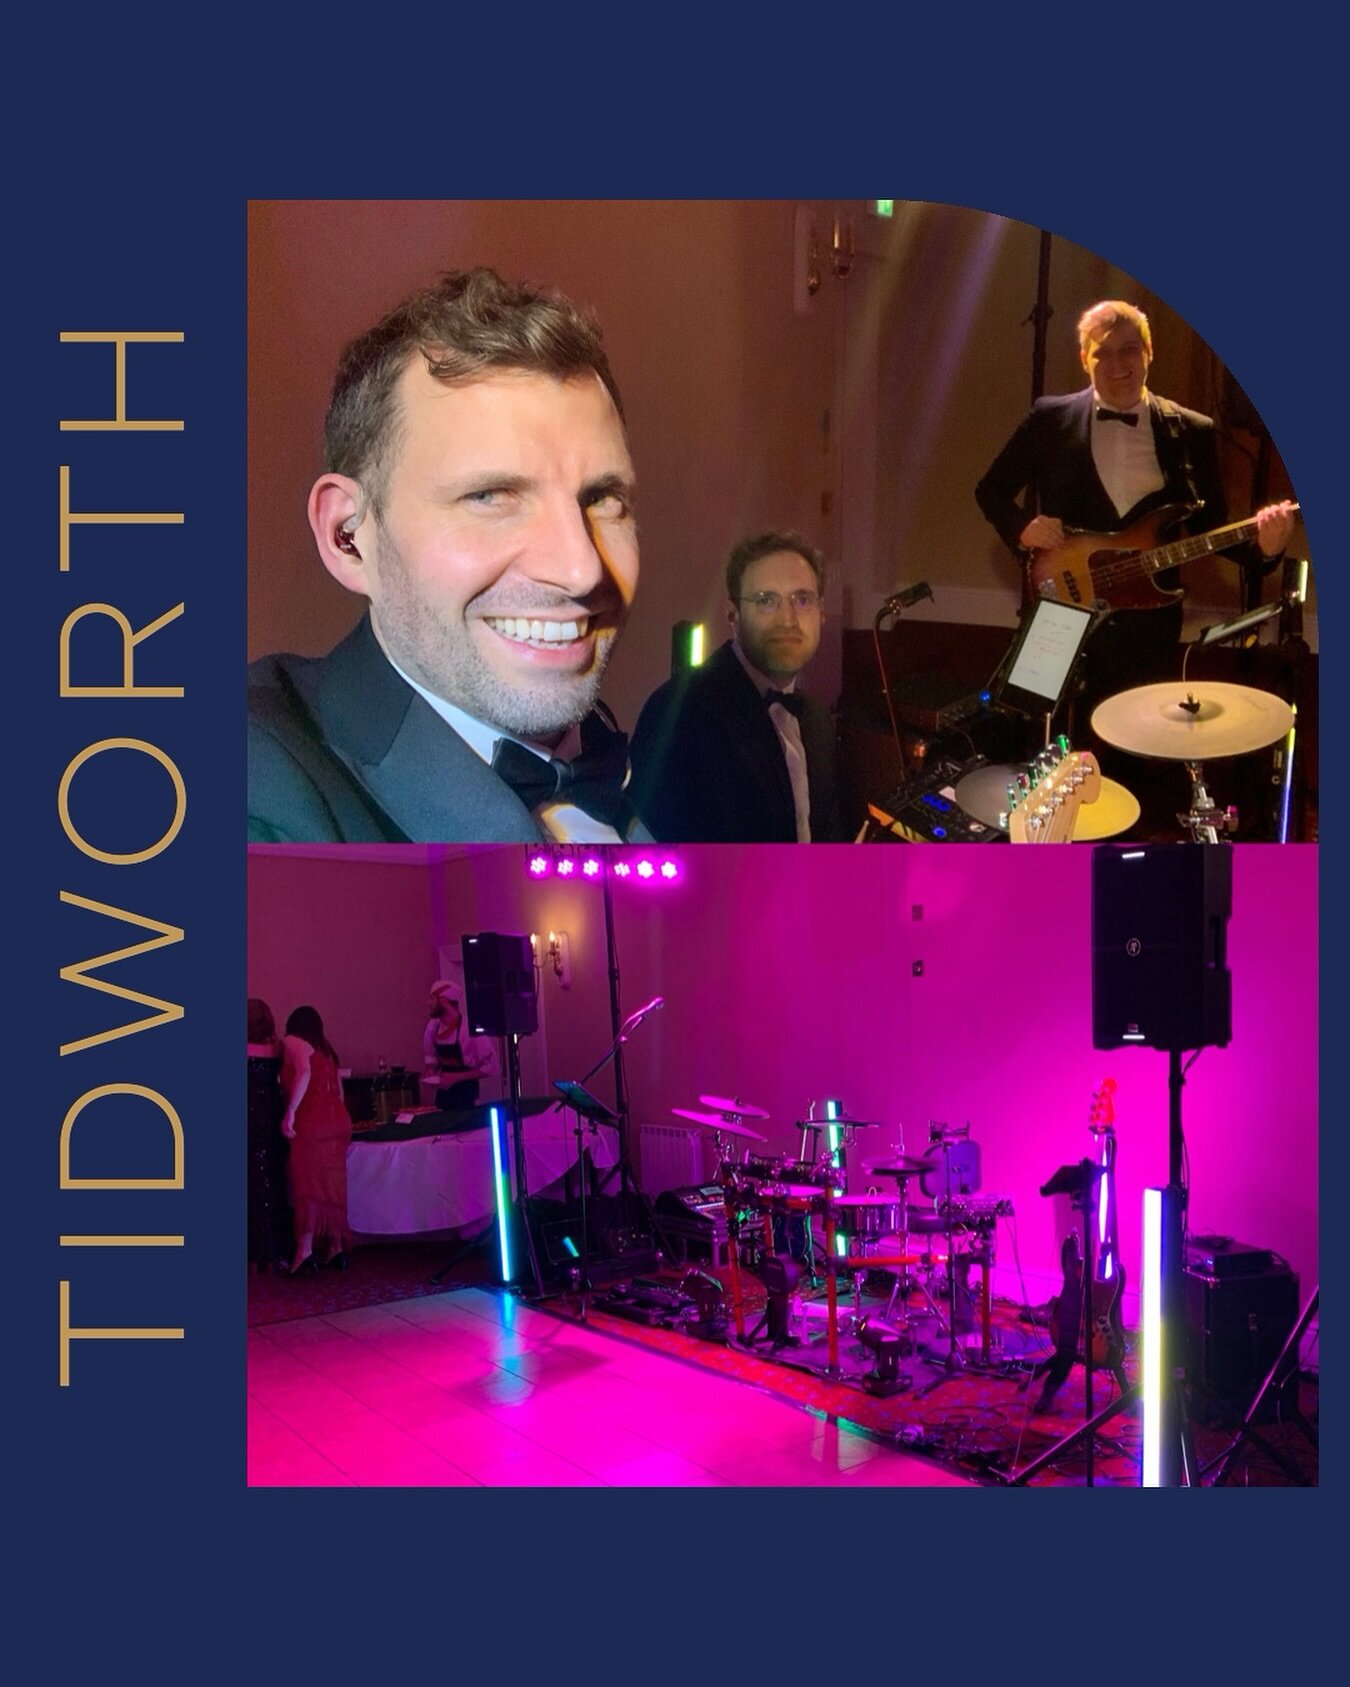 &ldquo; Every Knight were great. Ian was very co-operative prior to the ball with planning. The band facilitated the host and other entertainers. Ian had good initiative with suggesting tge playlist which would suit the audience. &ldquo;

Genevieve -